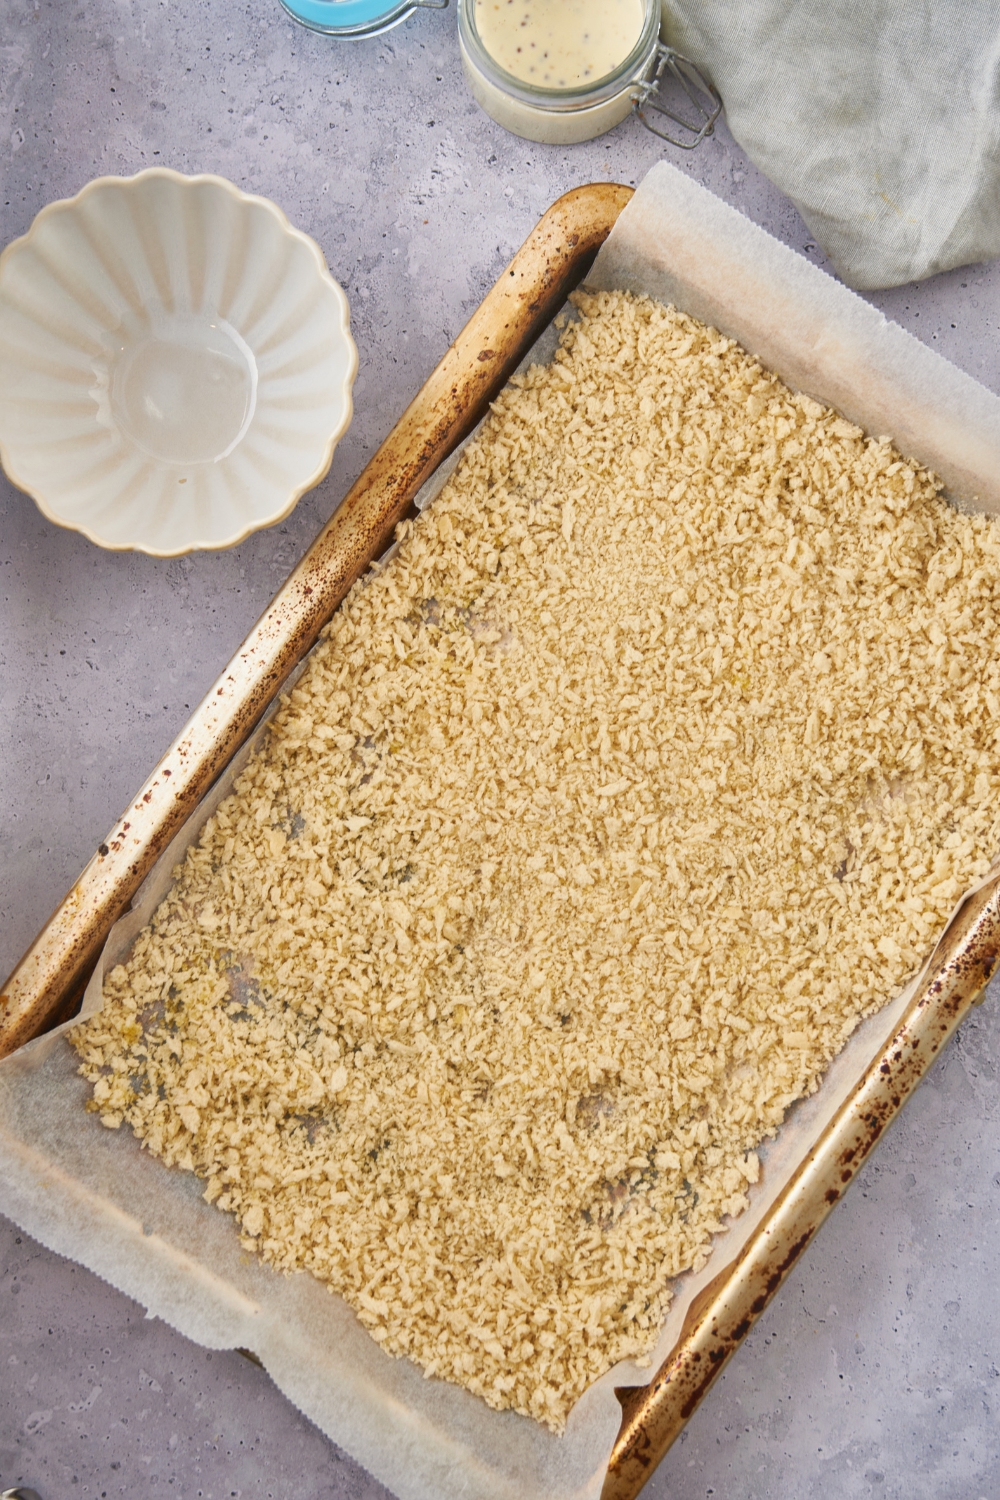 A baking sheet lined with parchment paper covered in an even layer of panko bread crumbs.